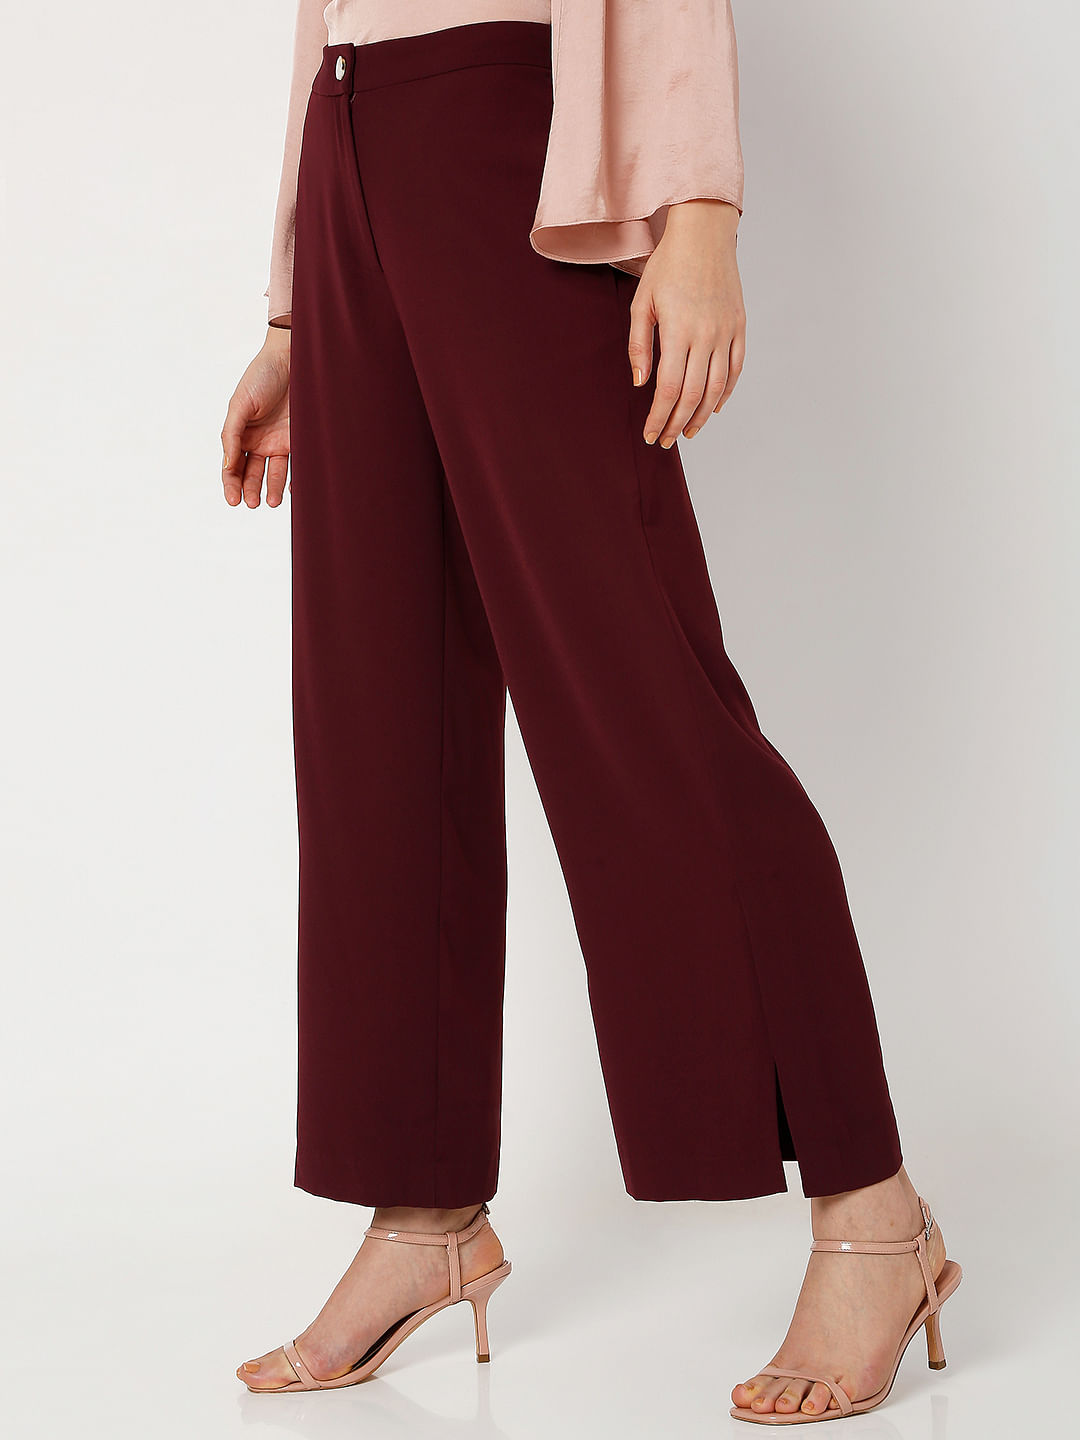 Burgundy Wide Leg Trousers  In The Style